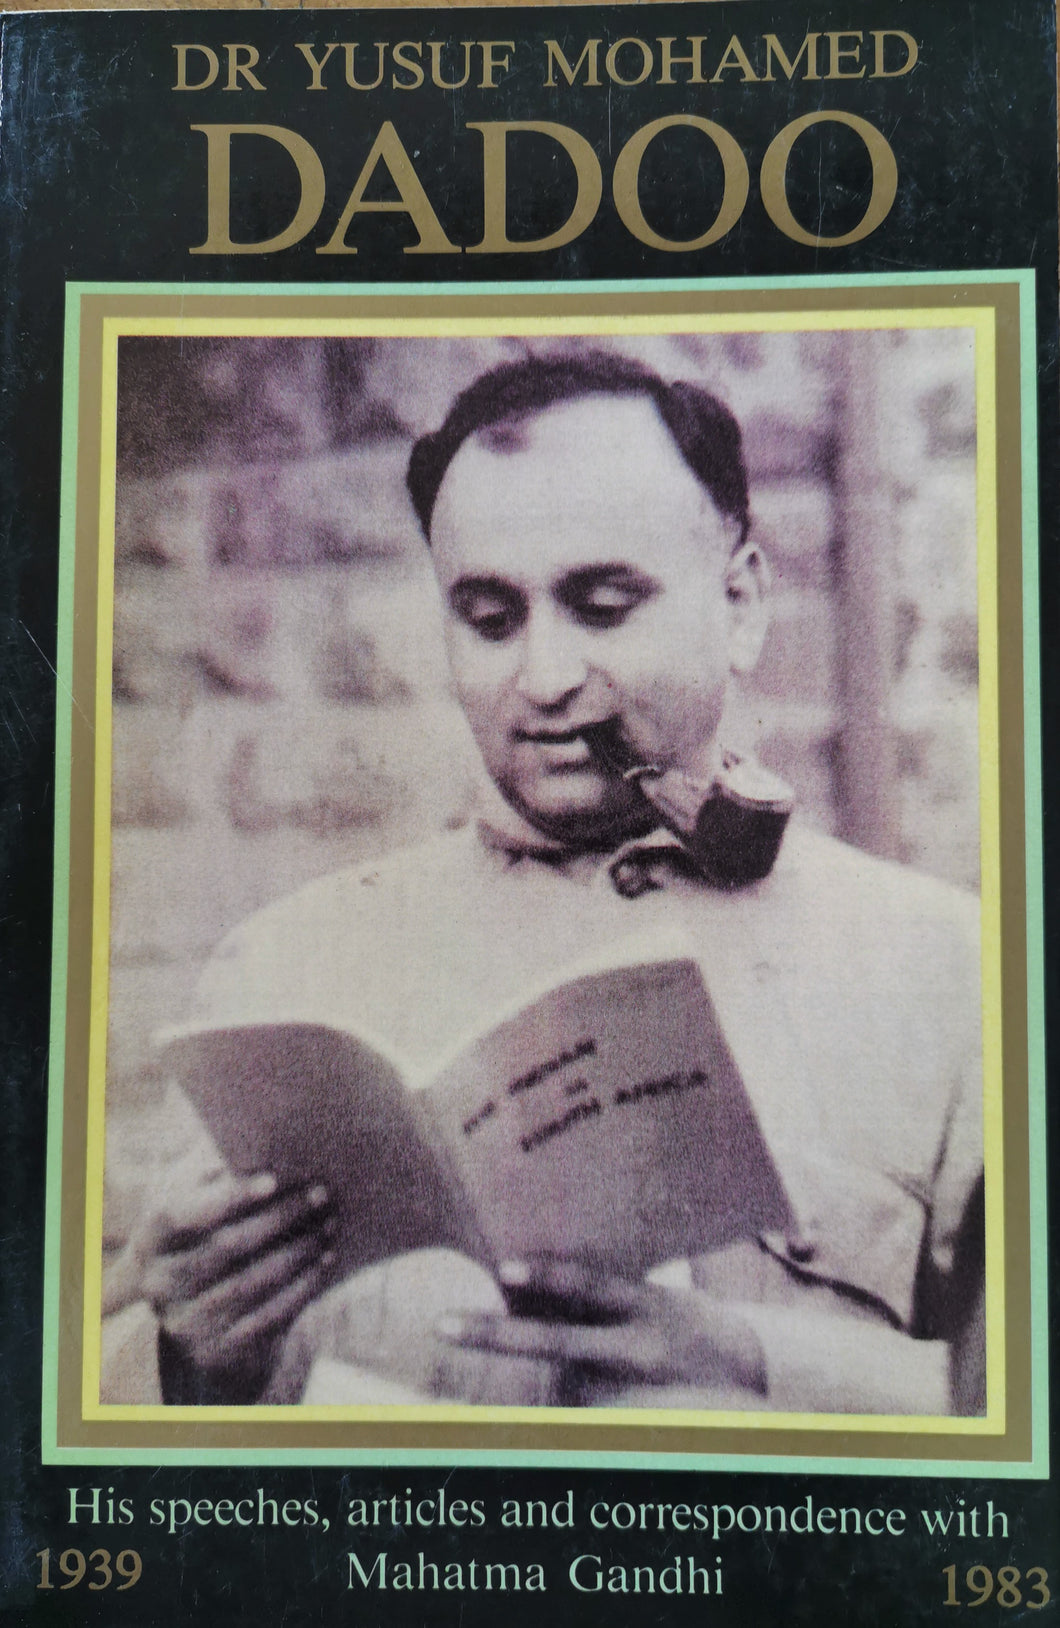 Dr. Yusuf Mohamed Dadoo - His Speeches, Articles and Correspondence with Mahatma Gandhi